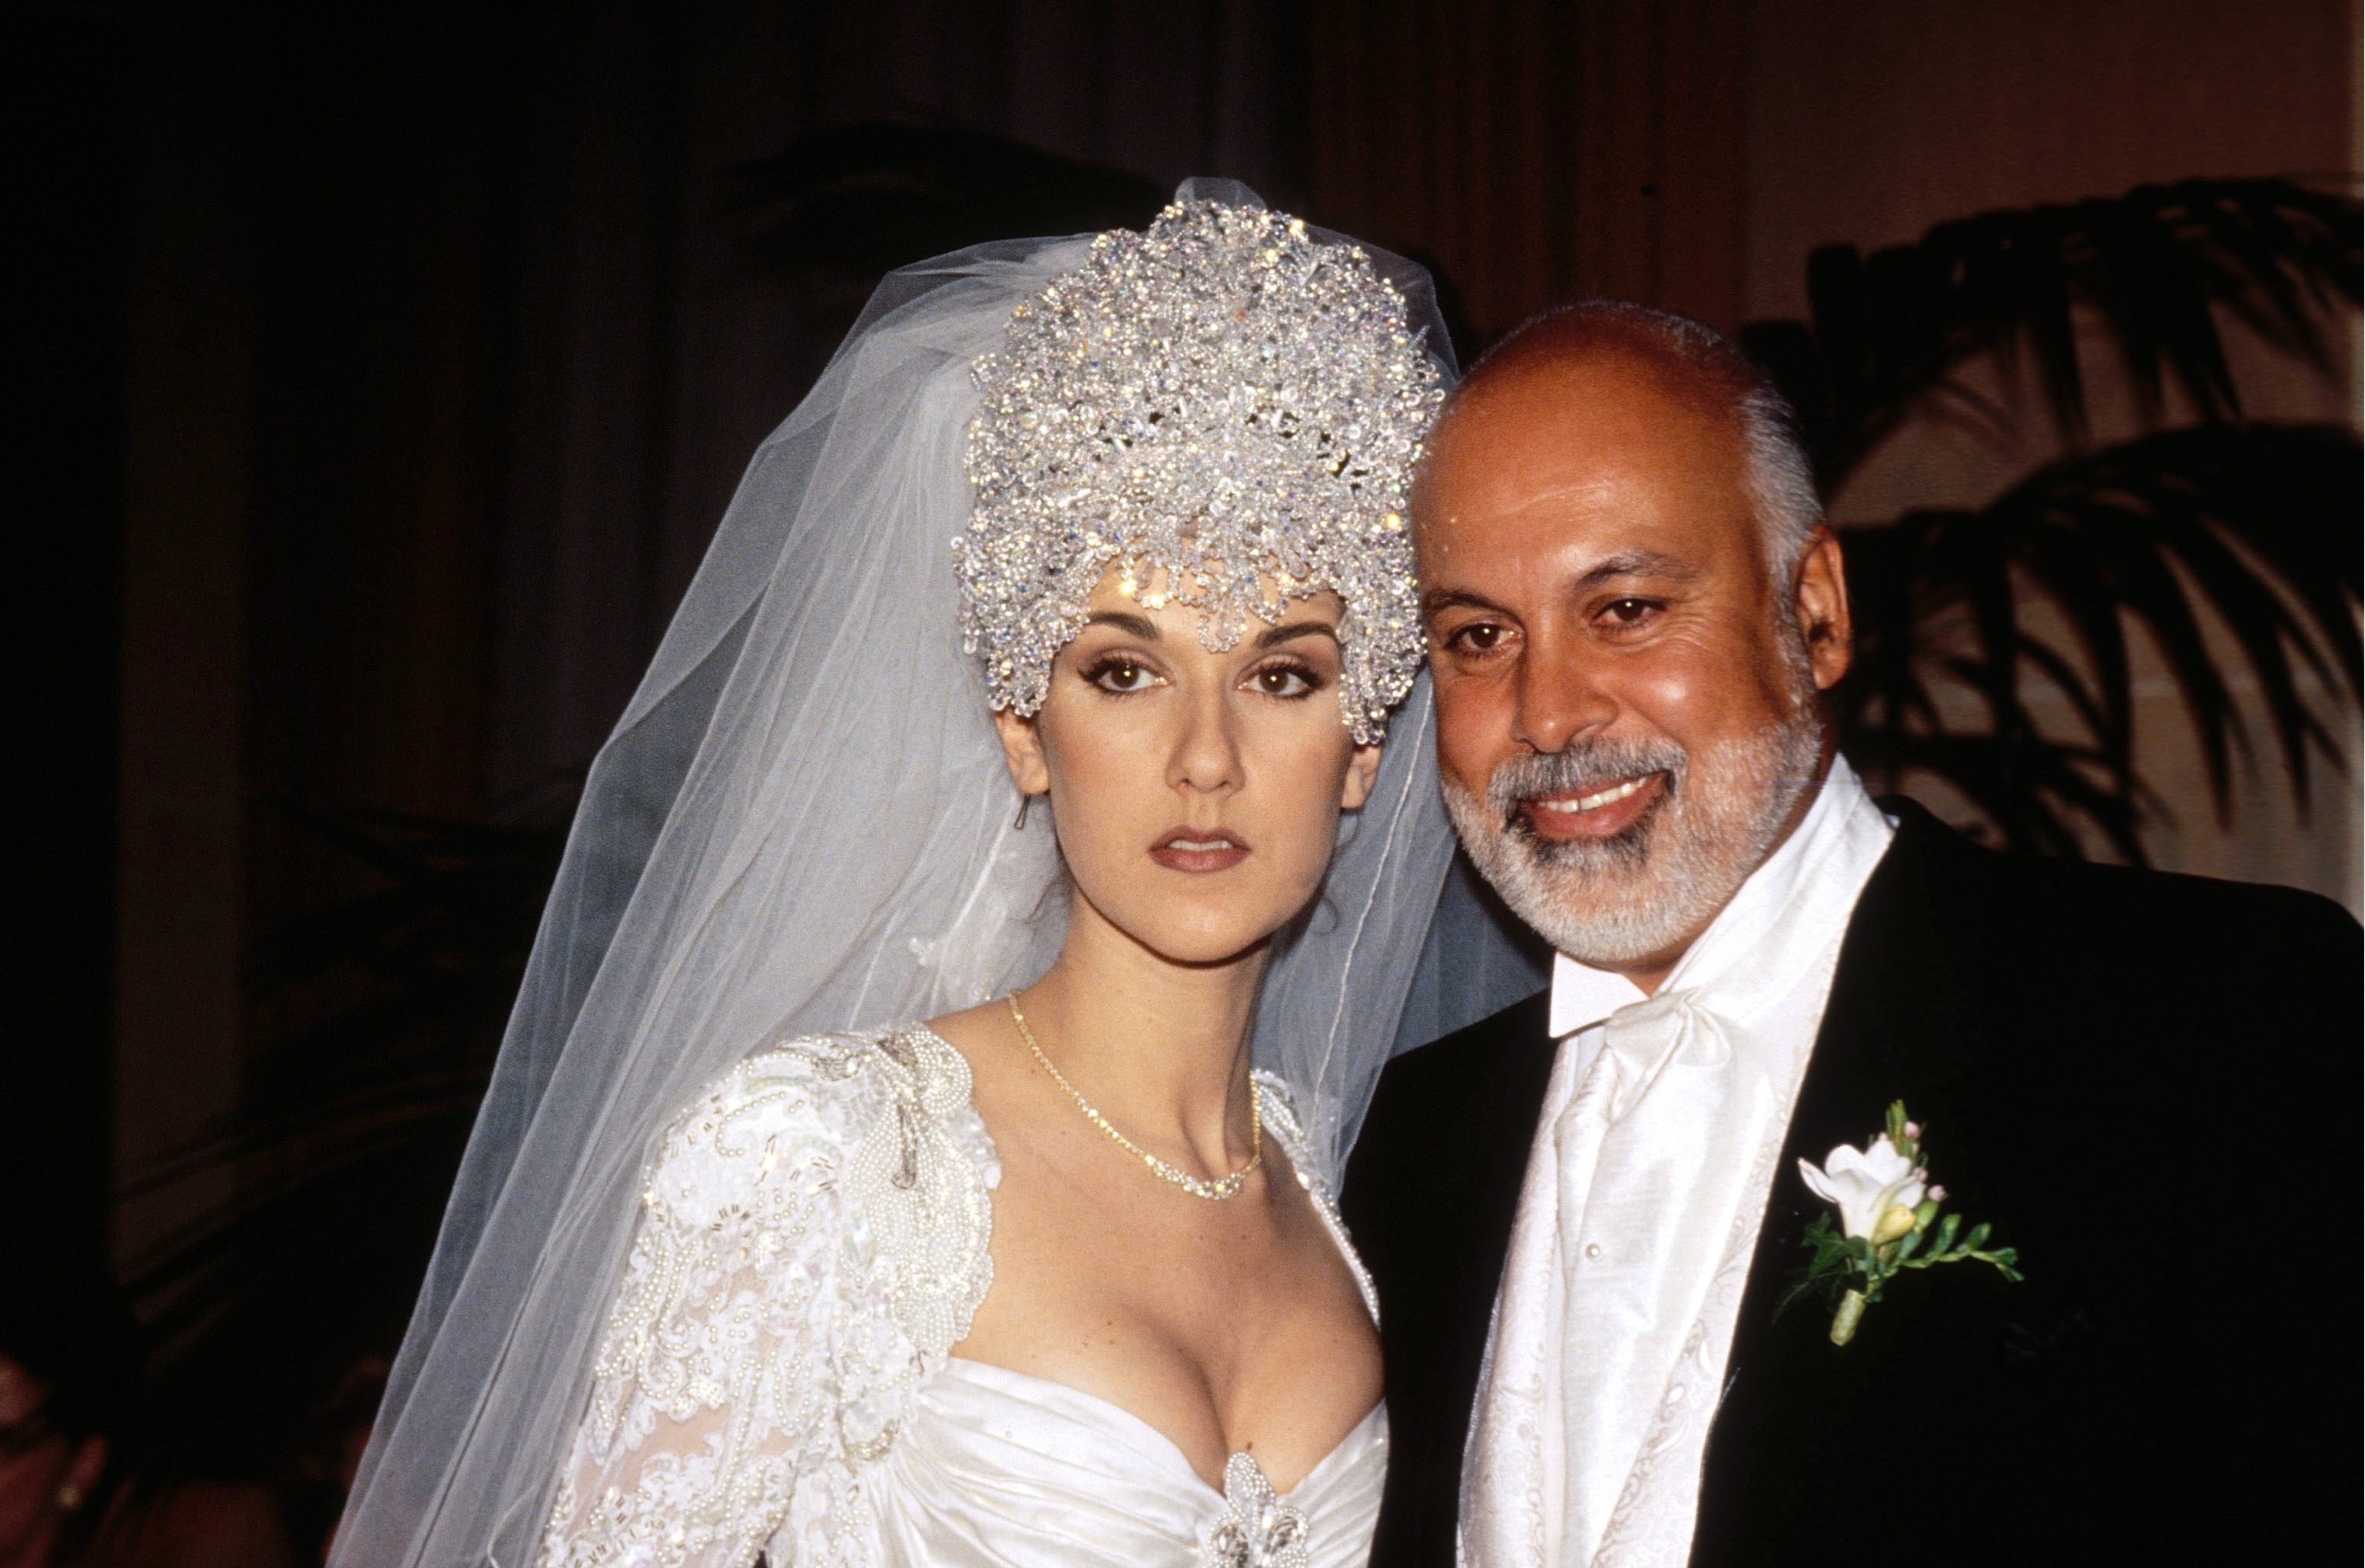 Celine Dion and Rene Angelil in Canada in 1994, Rene Angelil | Source: Getty Images